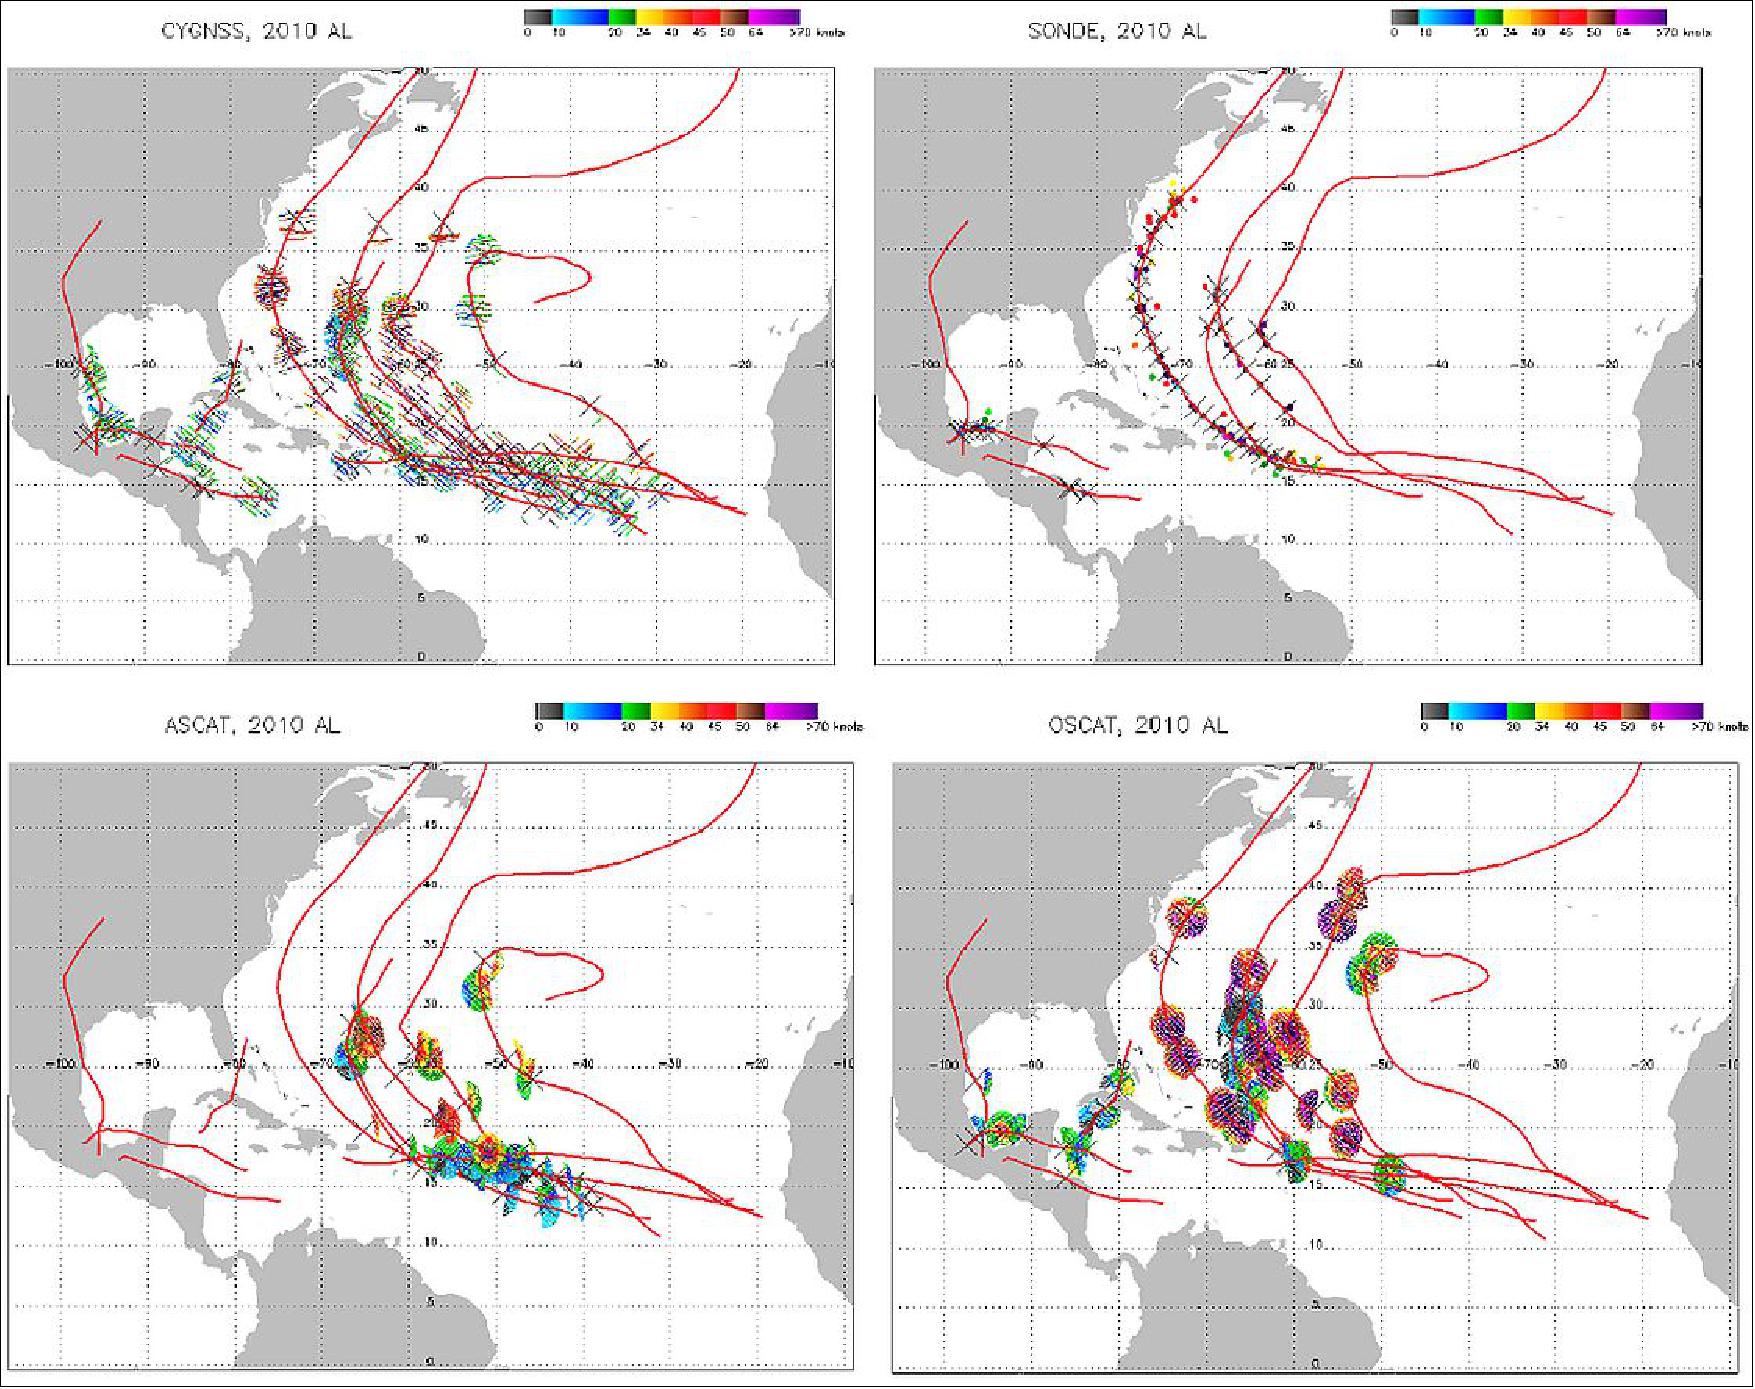 Figure 54: CYGNSS retrievals and corresponding 'truth' data from OSCAT, ASCAT and GPS dropsondes for tropical cyclones during the 2010 season in the Atlantic basin (image credit: NOAA)